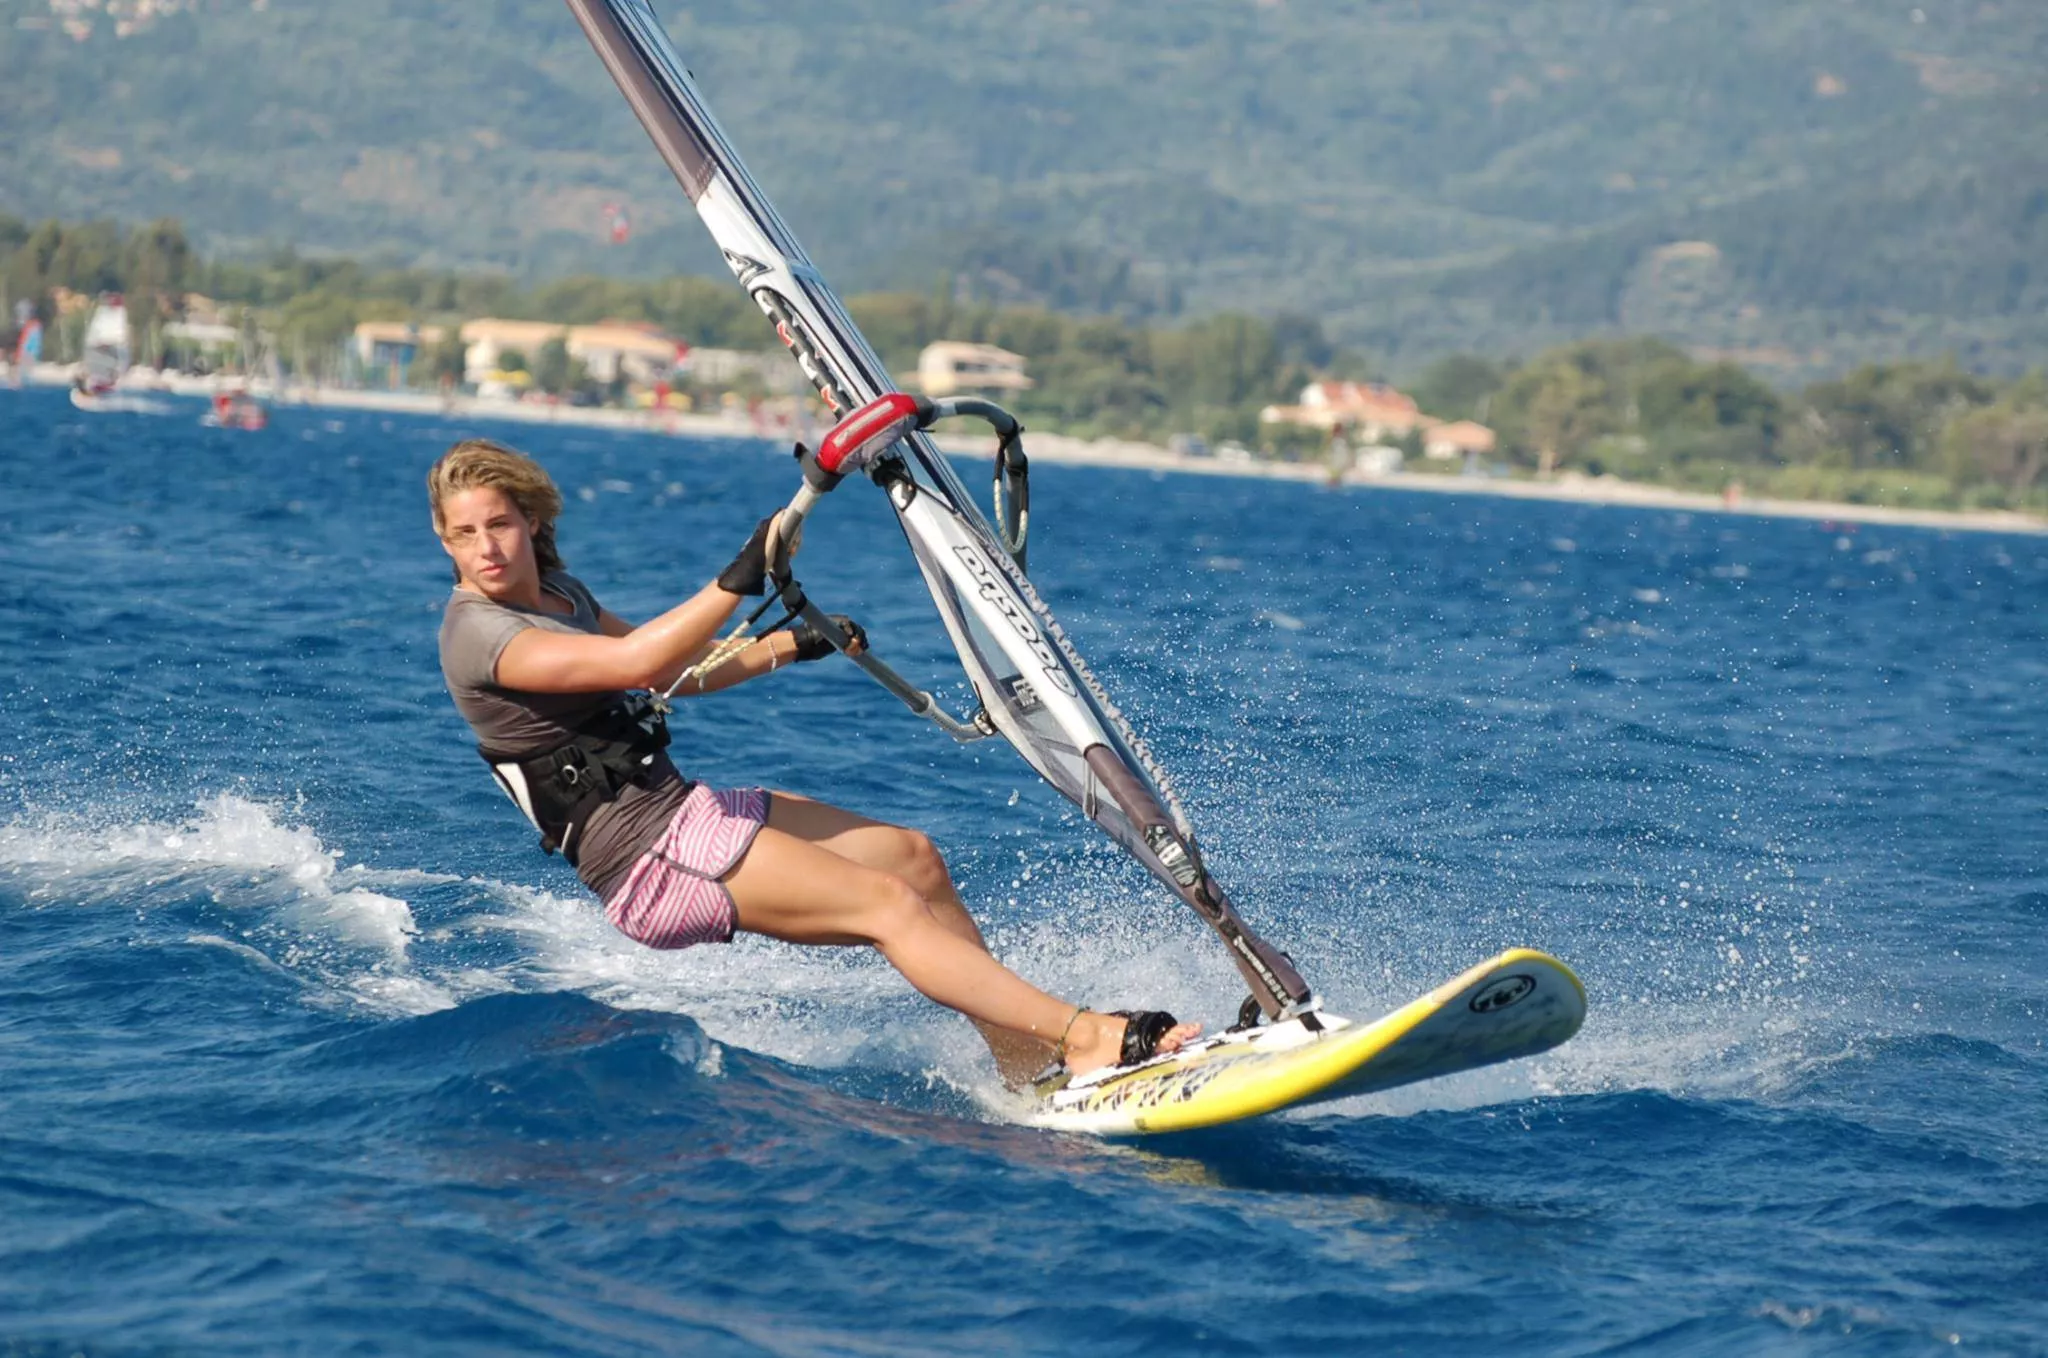 FH Academy in Italy, Europe | Surfing,Windsurfing - Rated 1.9